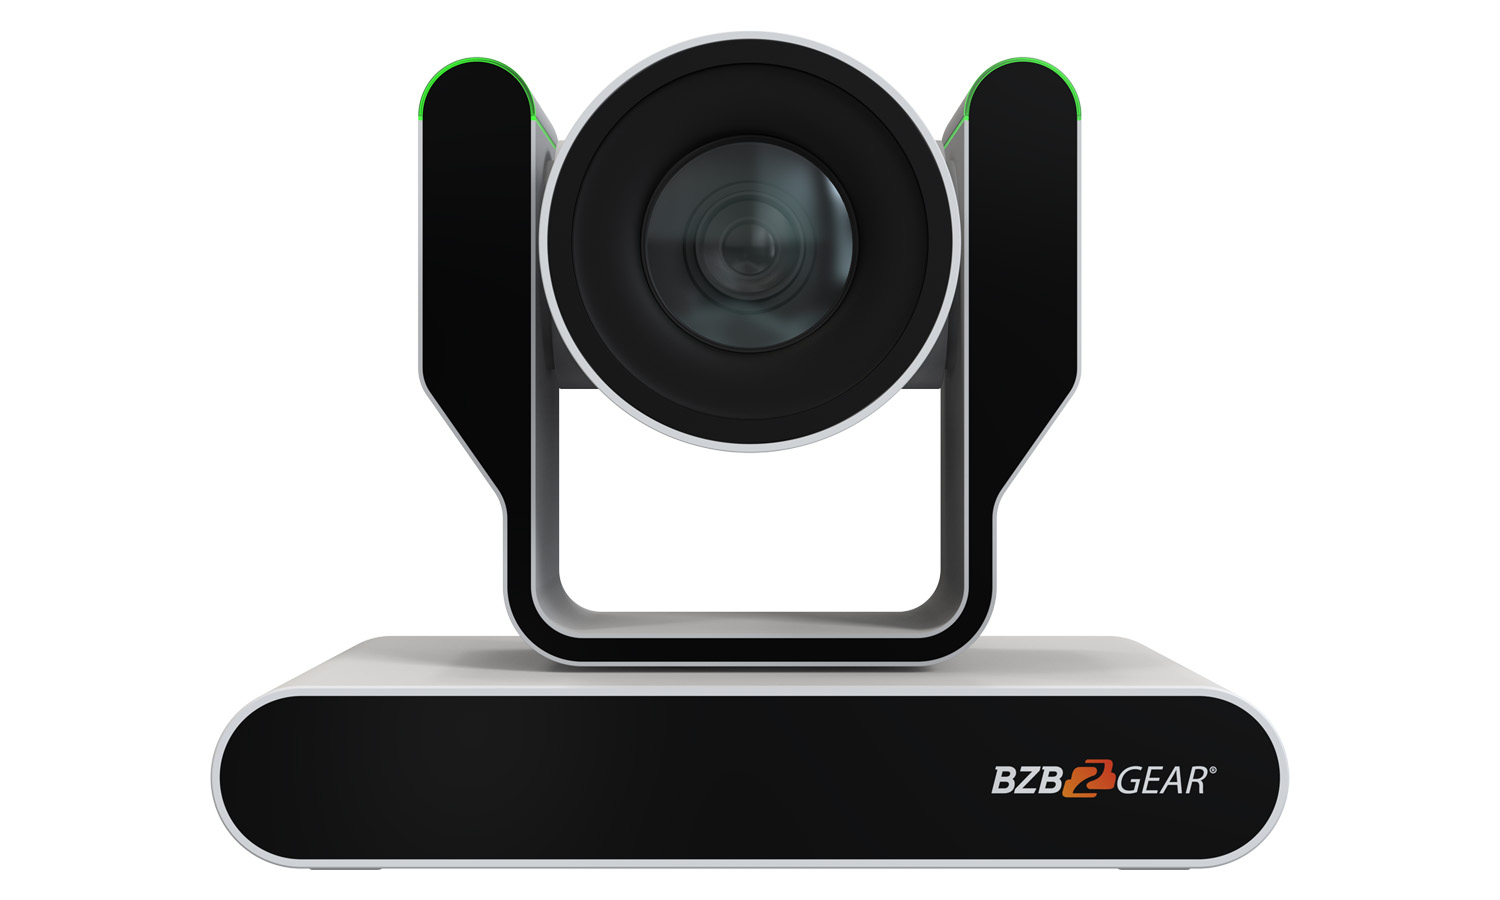 BG-ADAMO-4K25X-W 25X 4K@60Hz HDMI2.0/12G-SDI/USB 2.0/USB 3.0 Live Streaming PTZ Camera with Tally Lights (White) by BZBGEAR